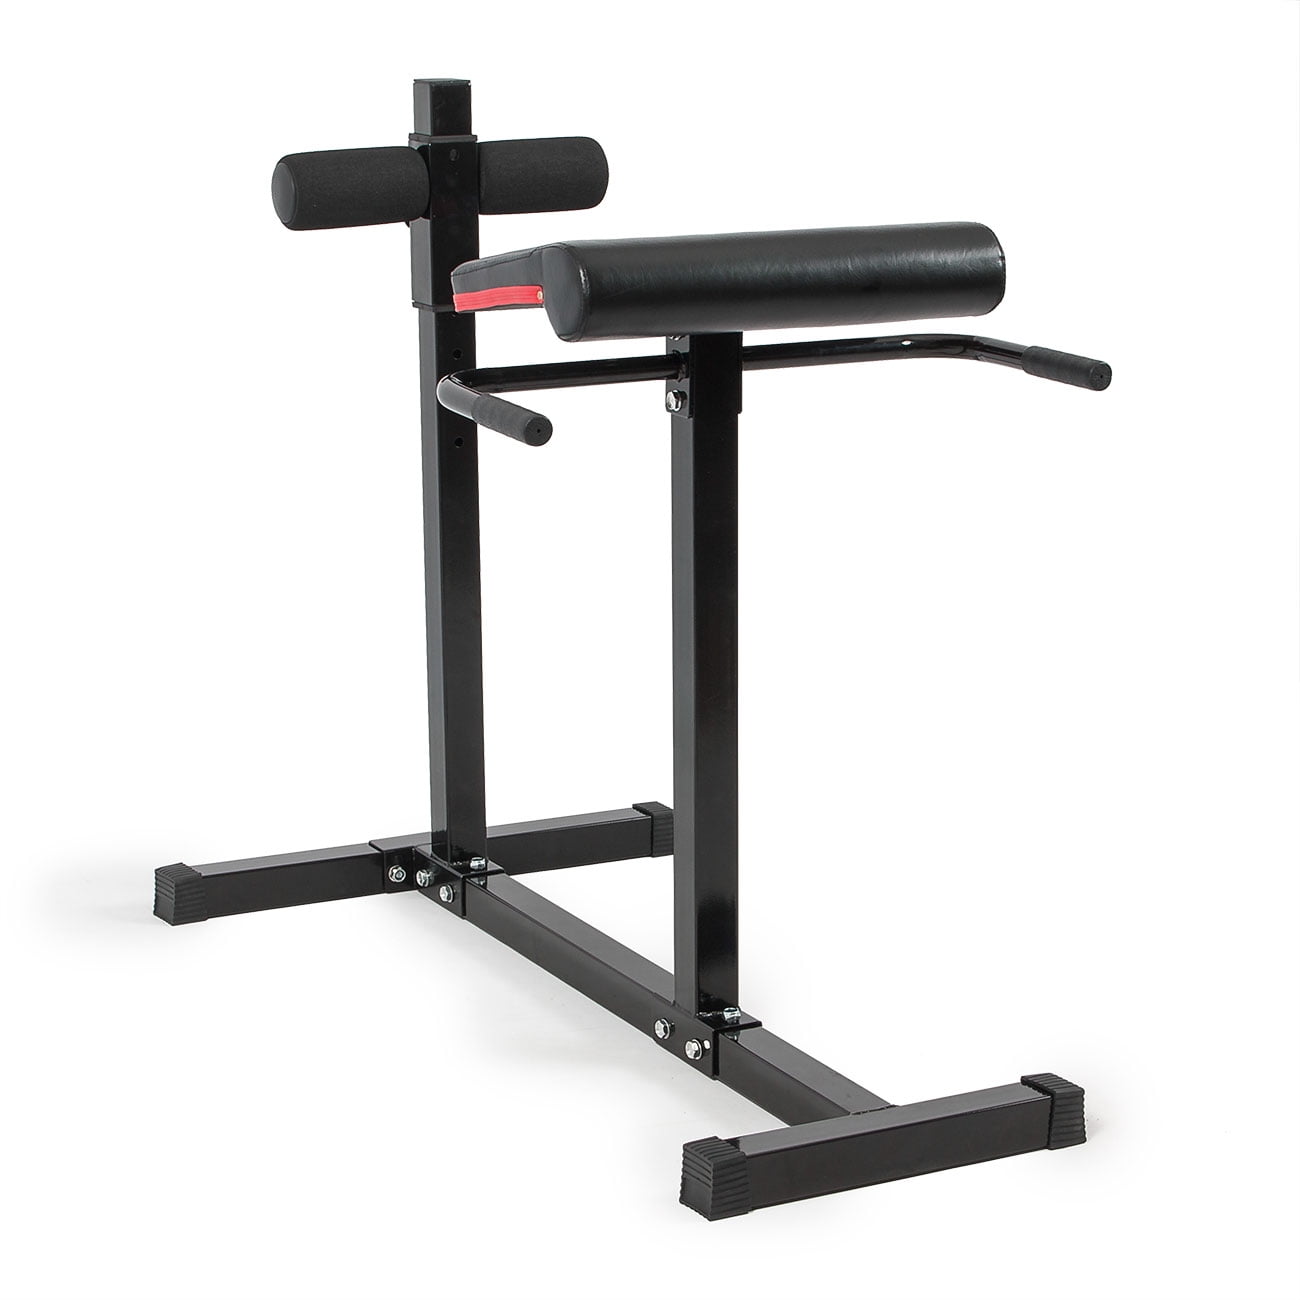 Akonza Roman Chair/Hyper Extension Bench Sit Up ABS